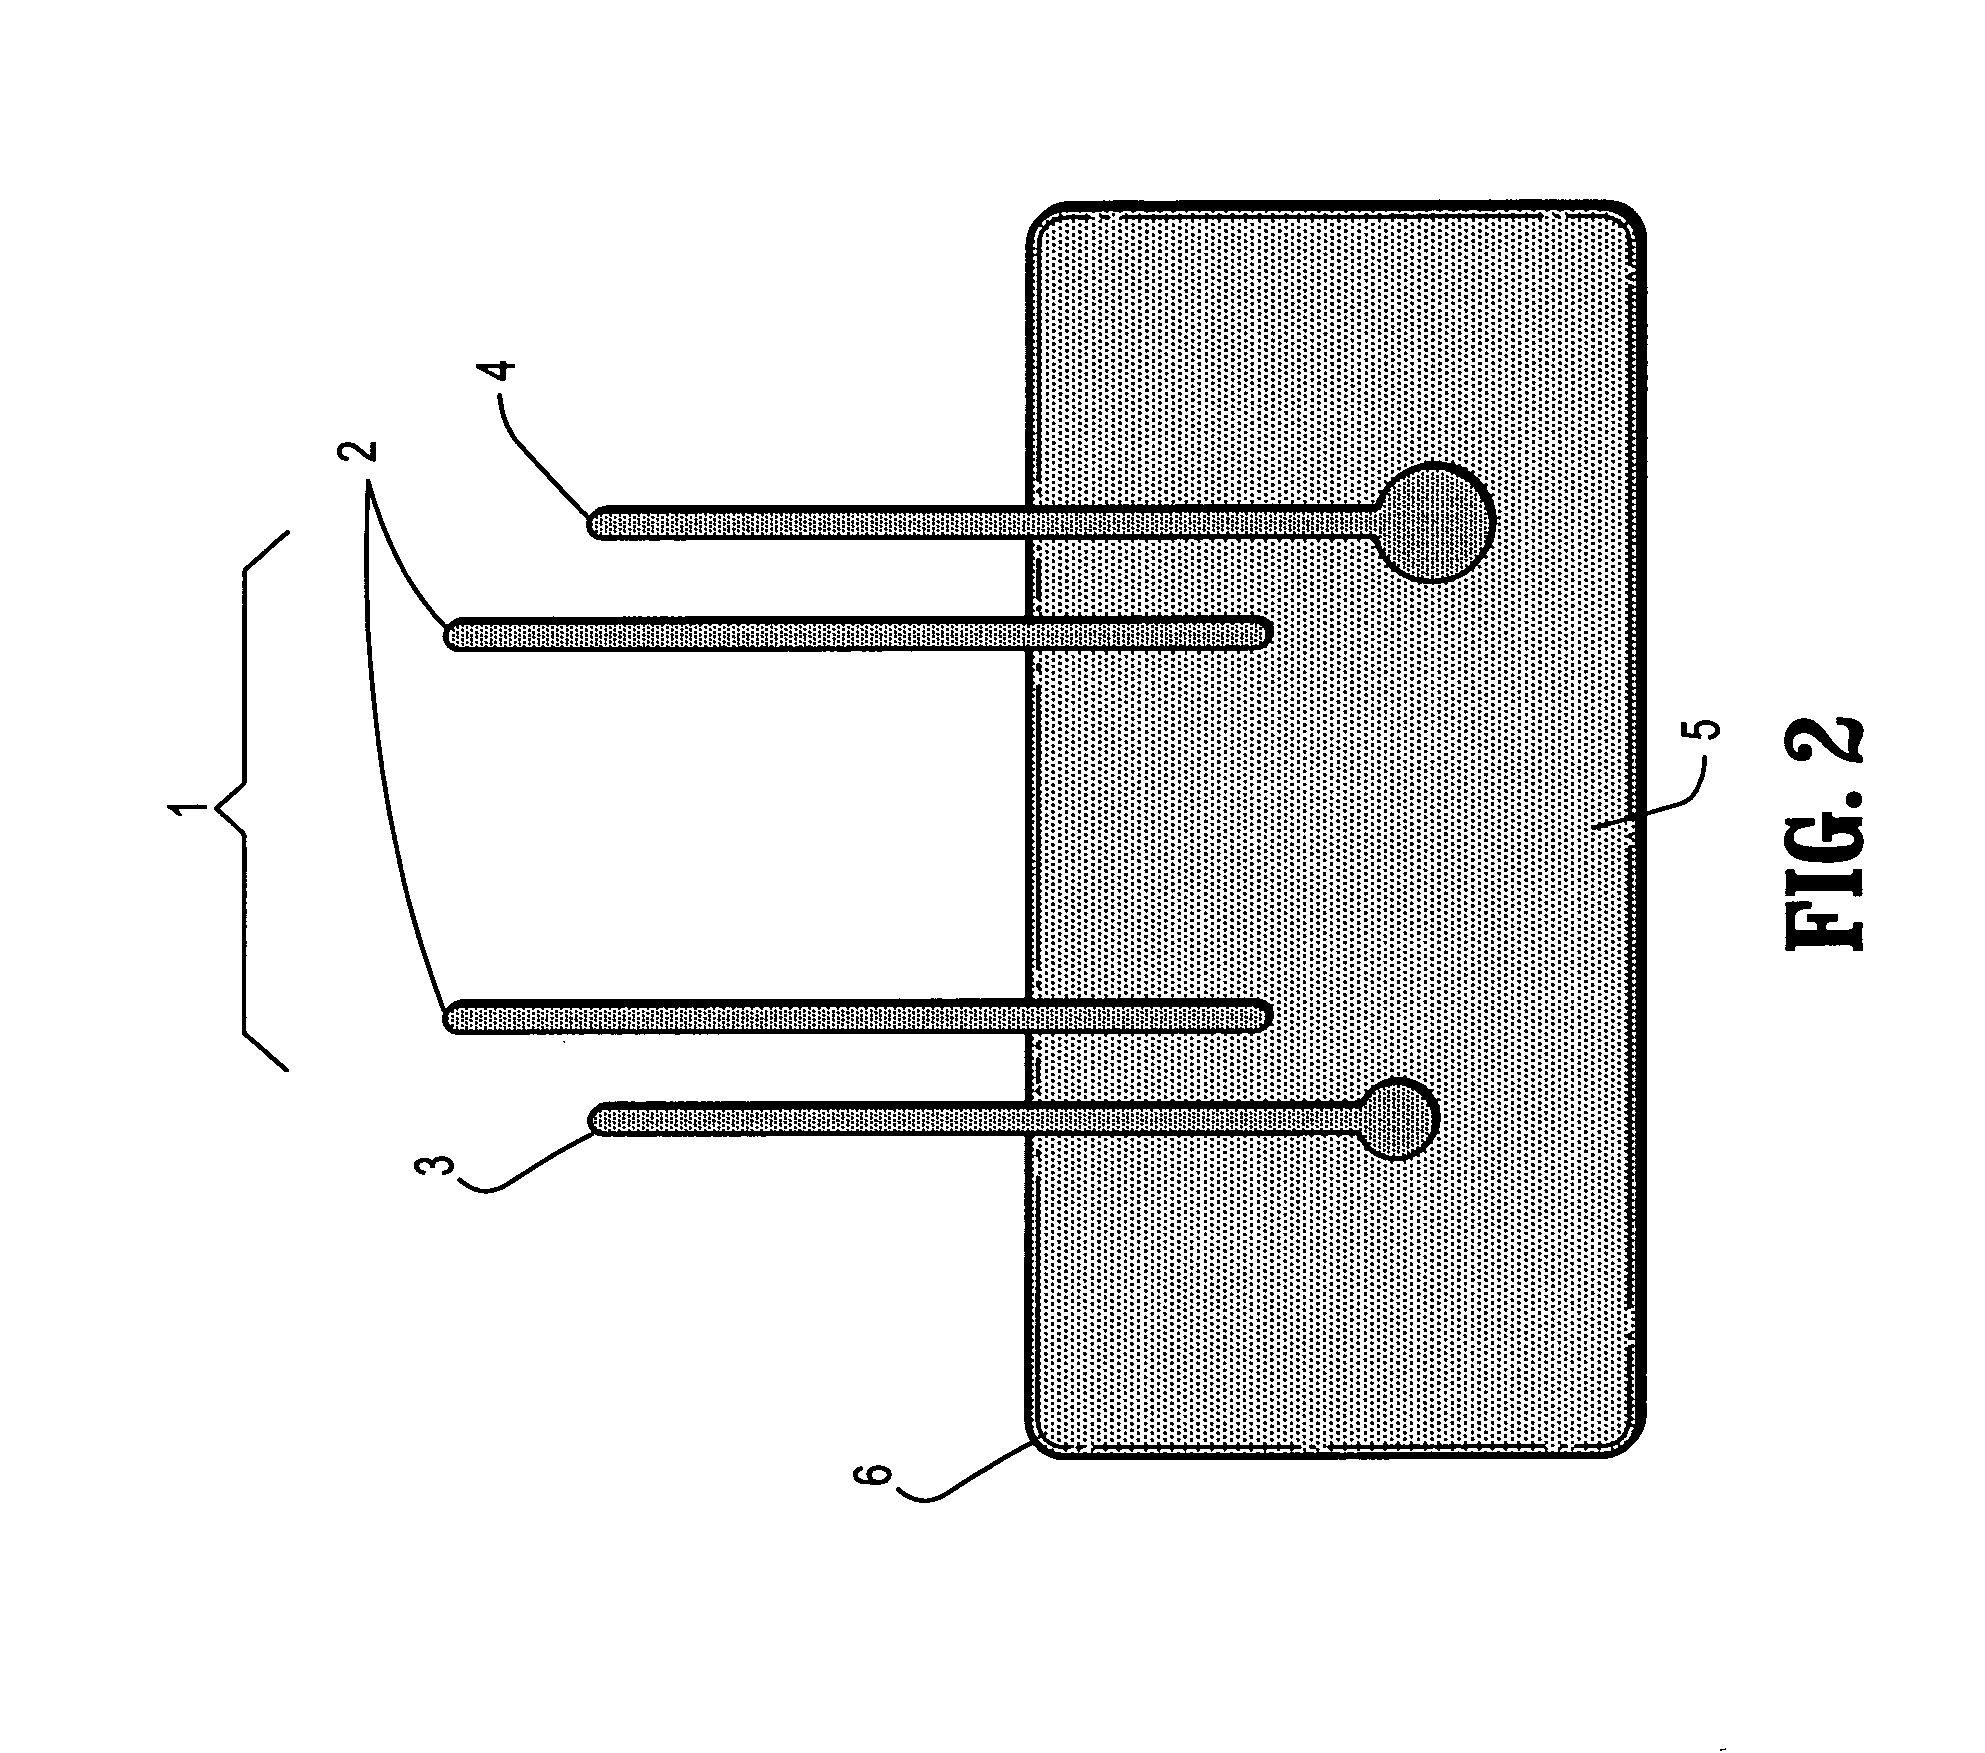 Method of analyzing the time-varying electrical response of a stimulated target substance